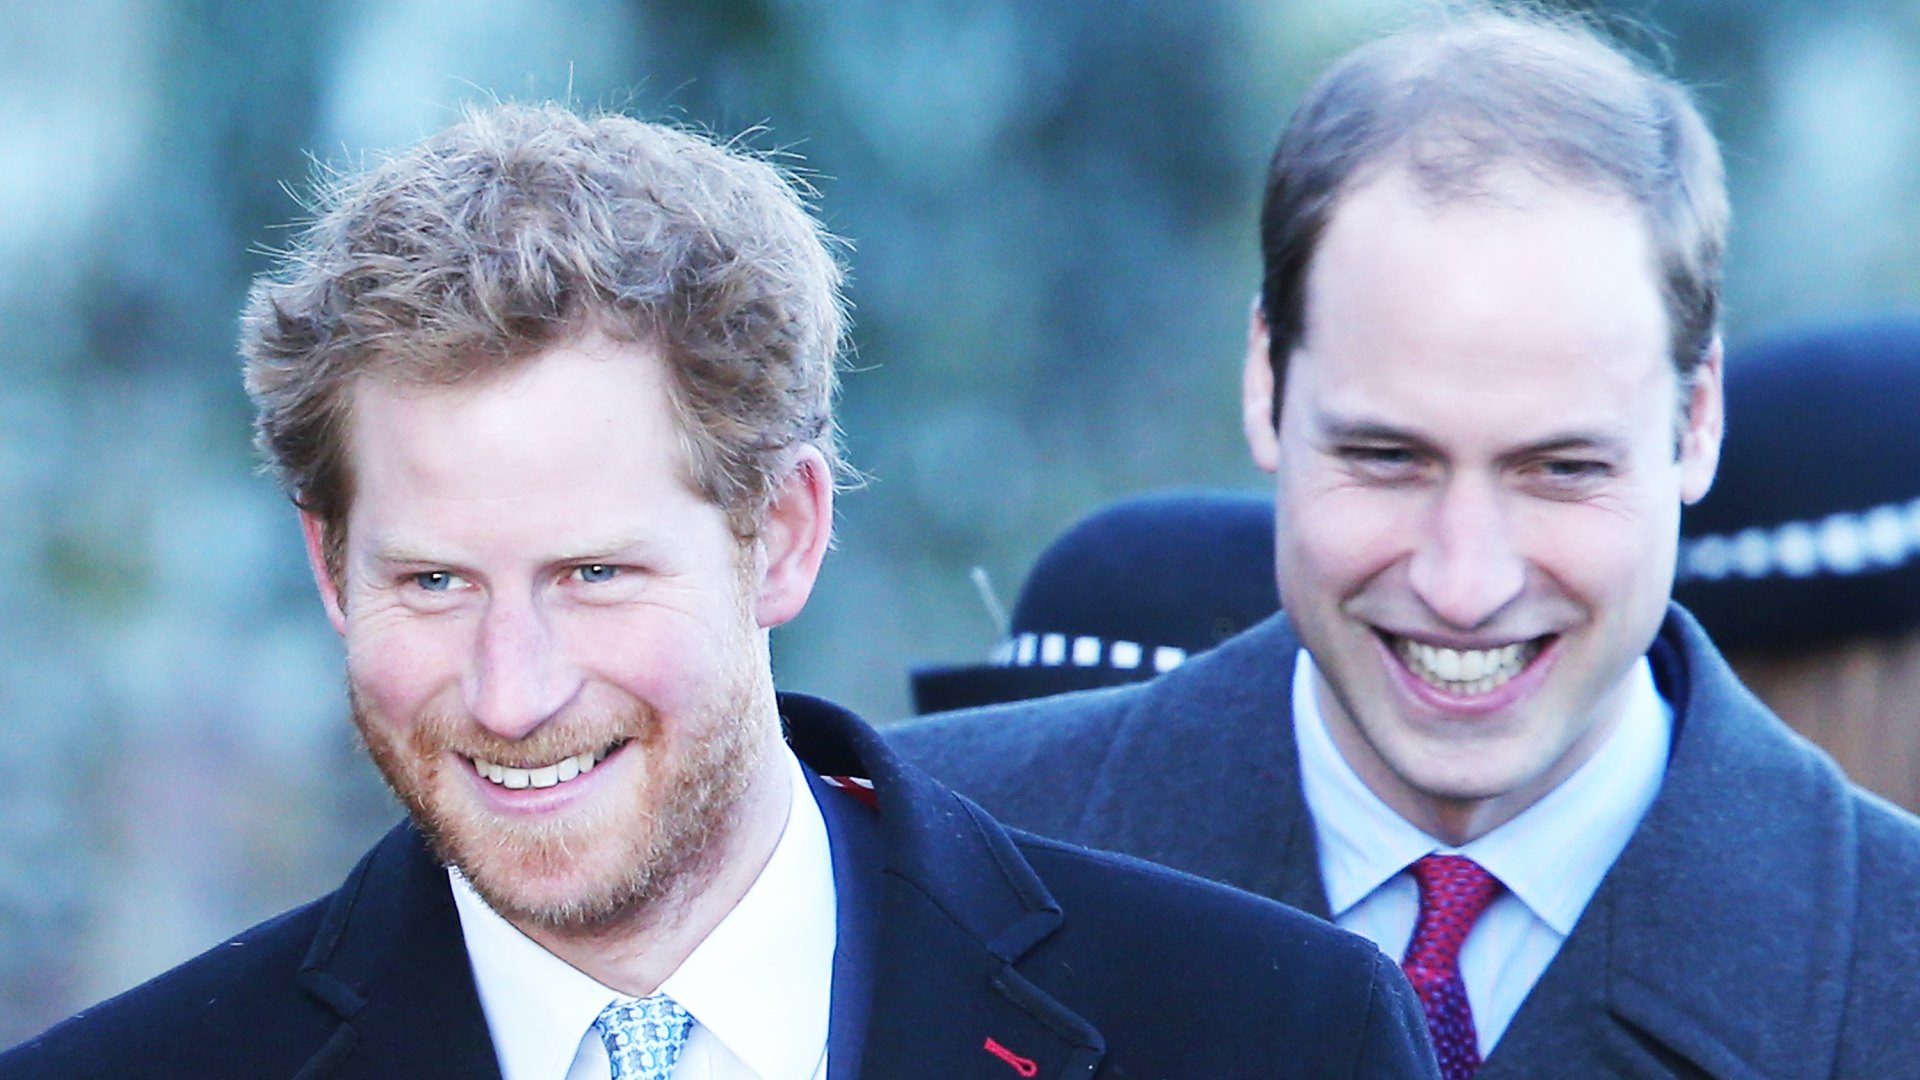 Prince William And Prince Harry Recall Moment They Learned Mom Princess Diana Had Died